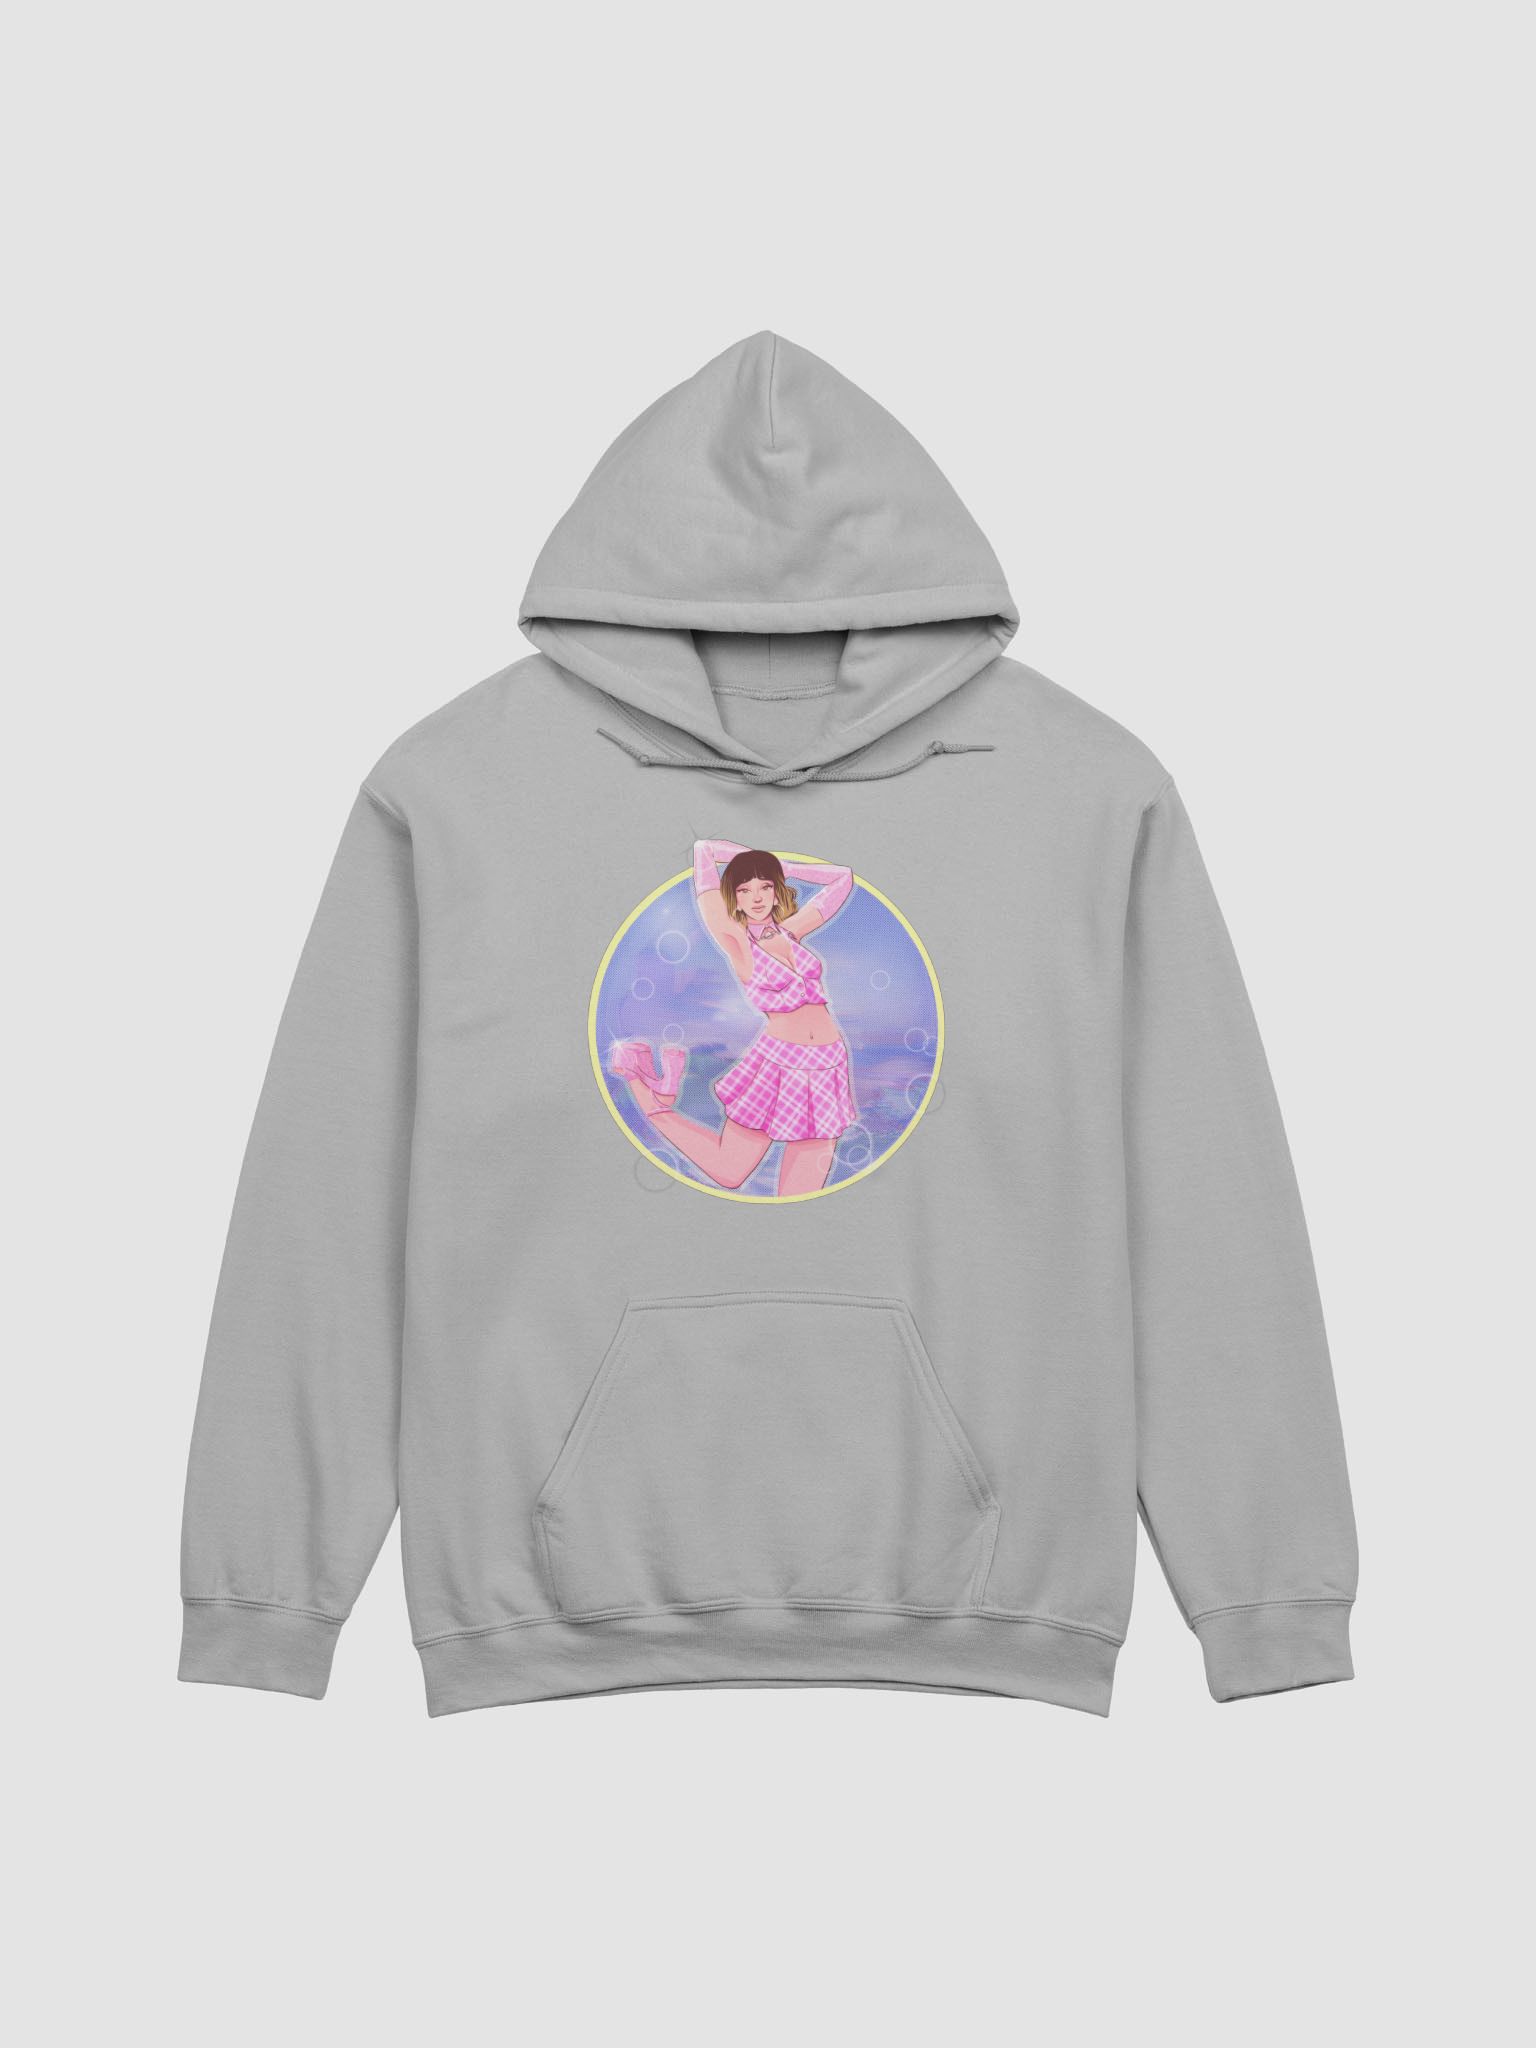 Pose For Me! Hoodie | PassionsPlanet